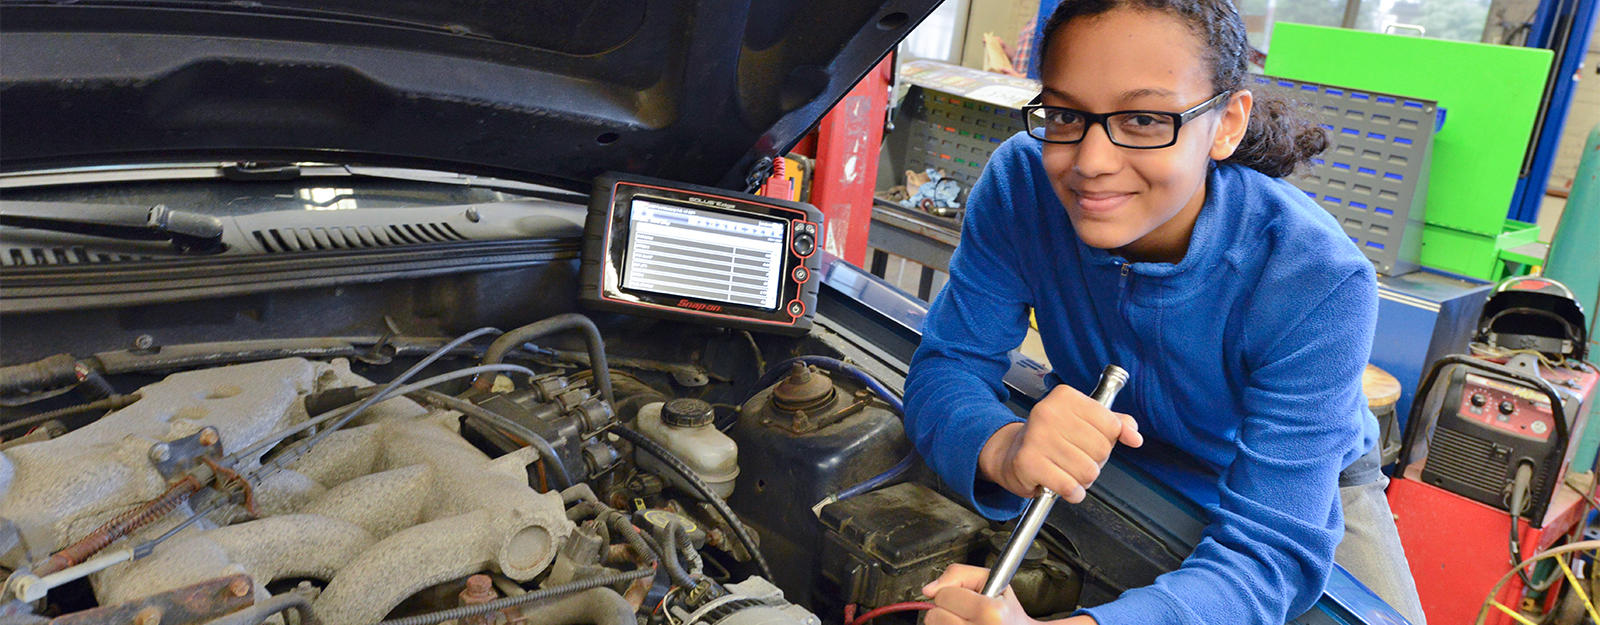 Student working on the engine of a car.